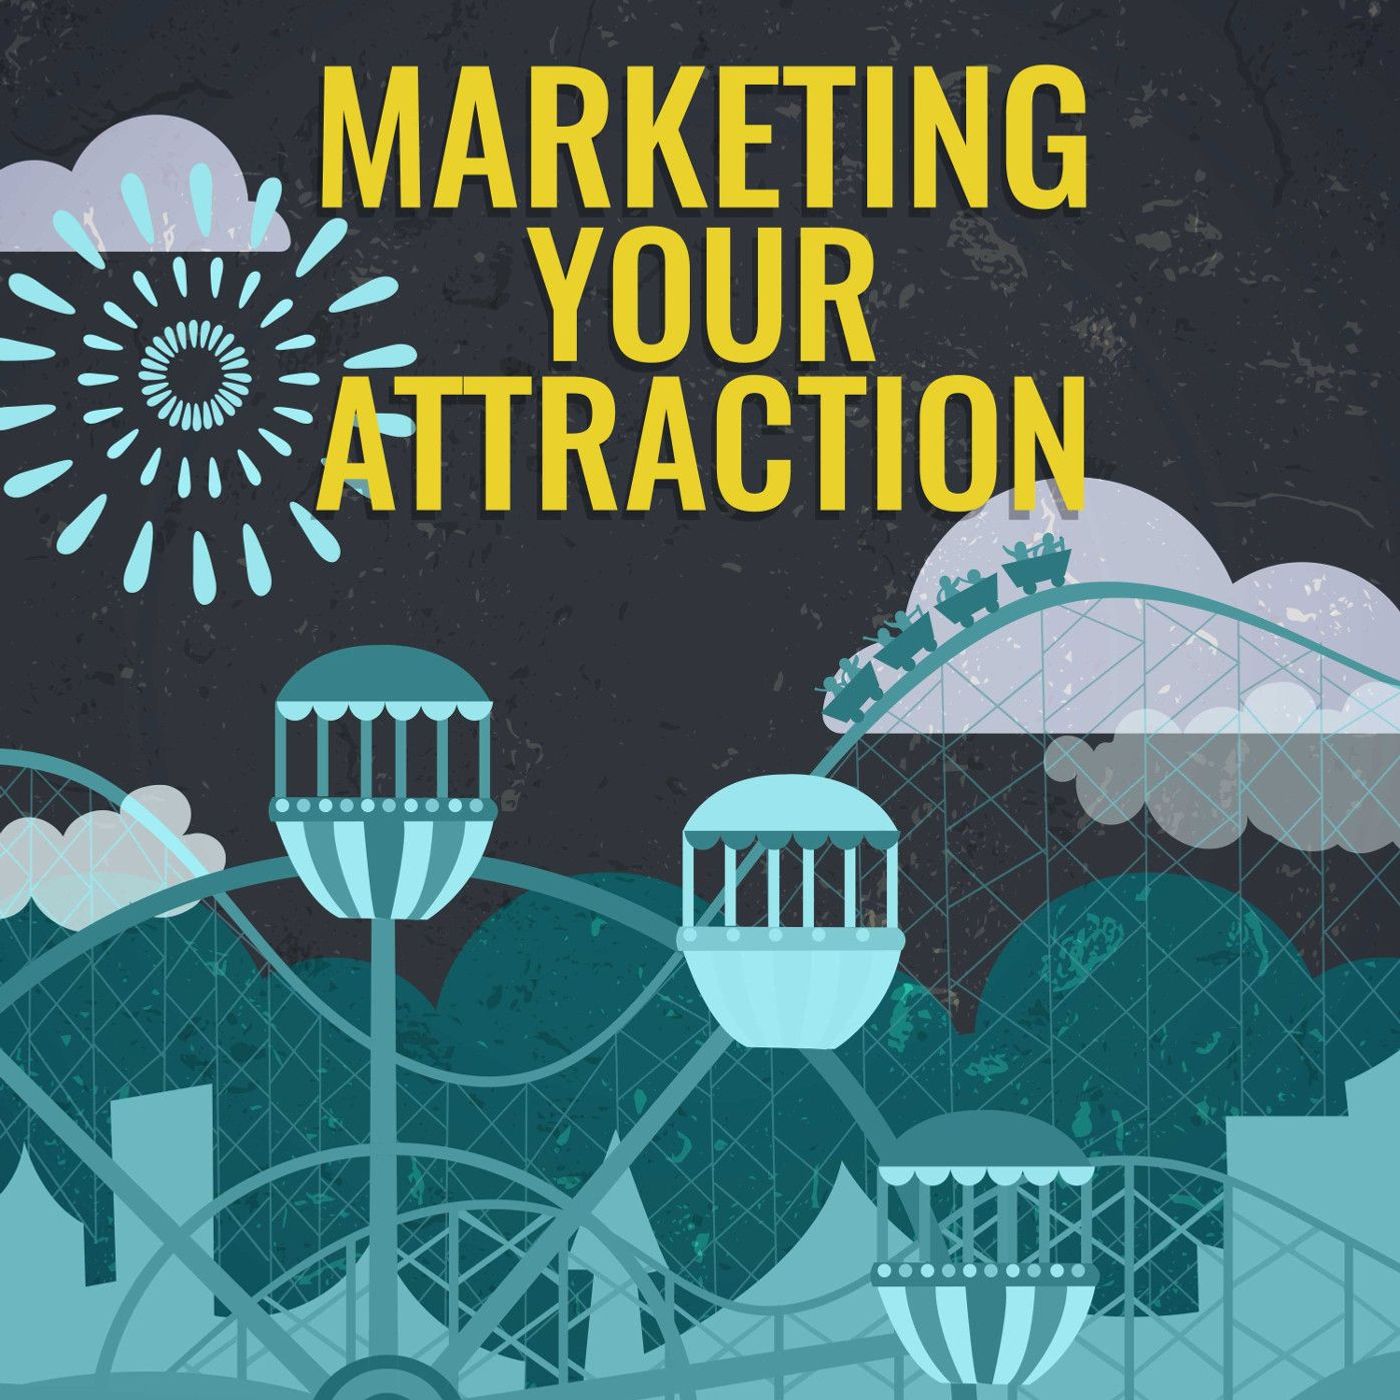 [Marketing Your Attraction] Adapting your attraction to a new target market’s culture